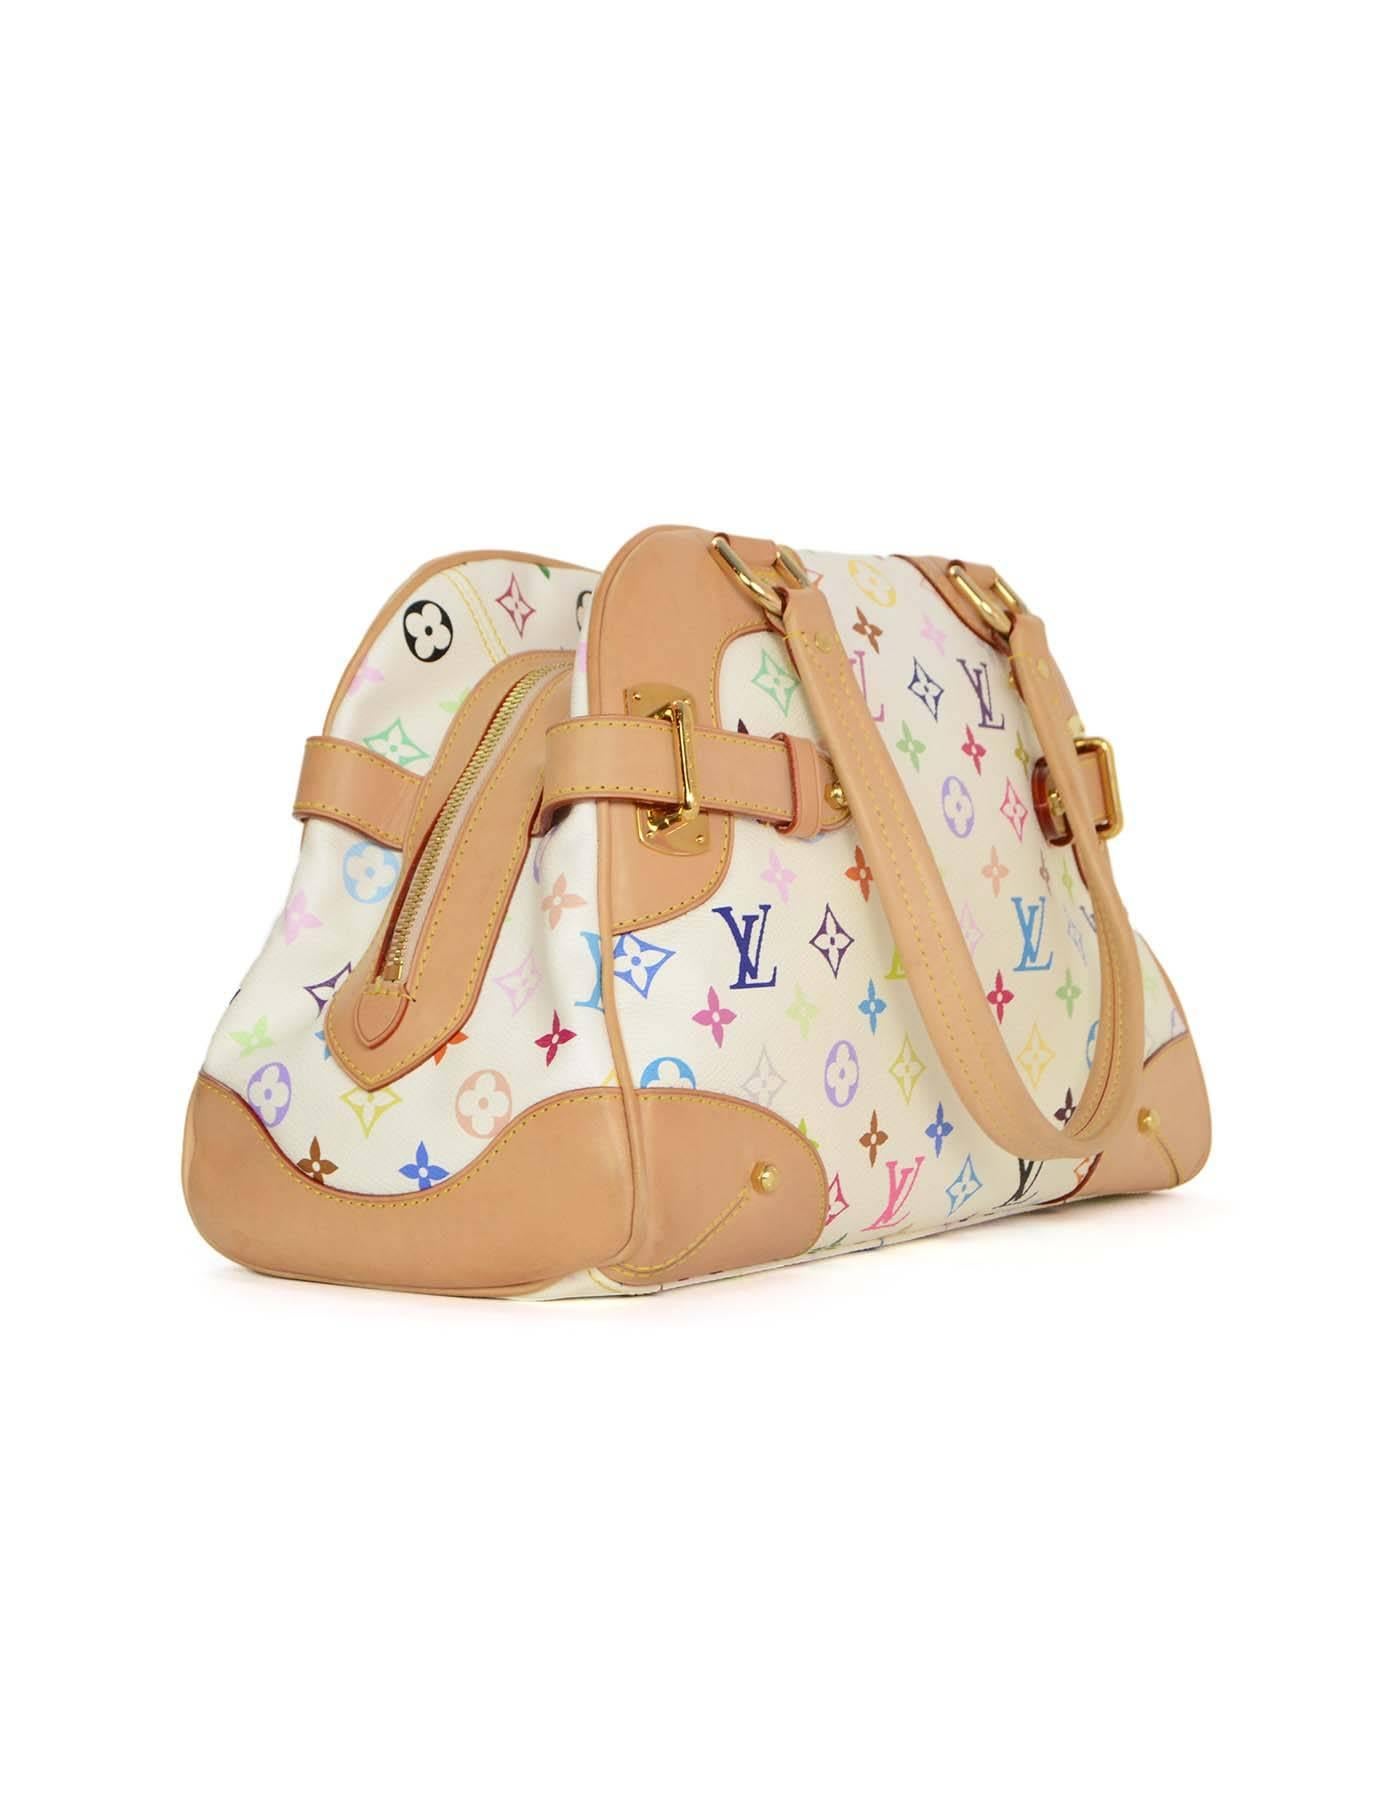 Louis Vuitton Multi-Colored Monogram Claudia Tote 
Features tan trim throughout
Made In: Italy
Year of Production: 2012
Color: Tan, white and multi-color
Hardware: Goldtone
Materials: Leather and coated canvas
Lining: Burgundy